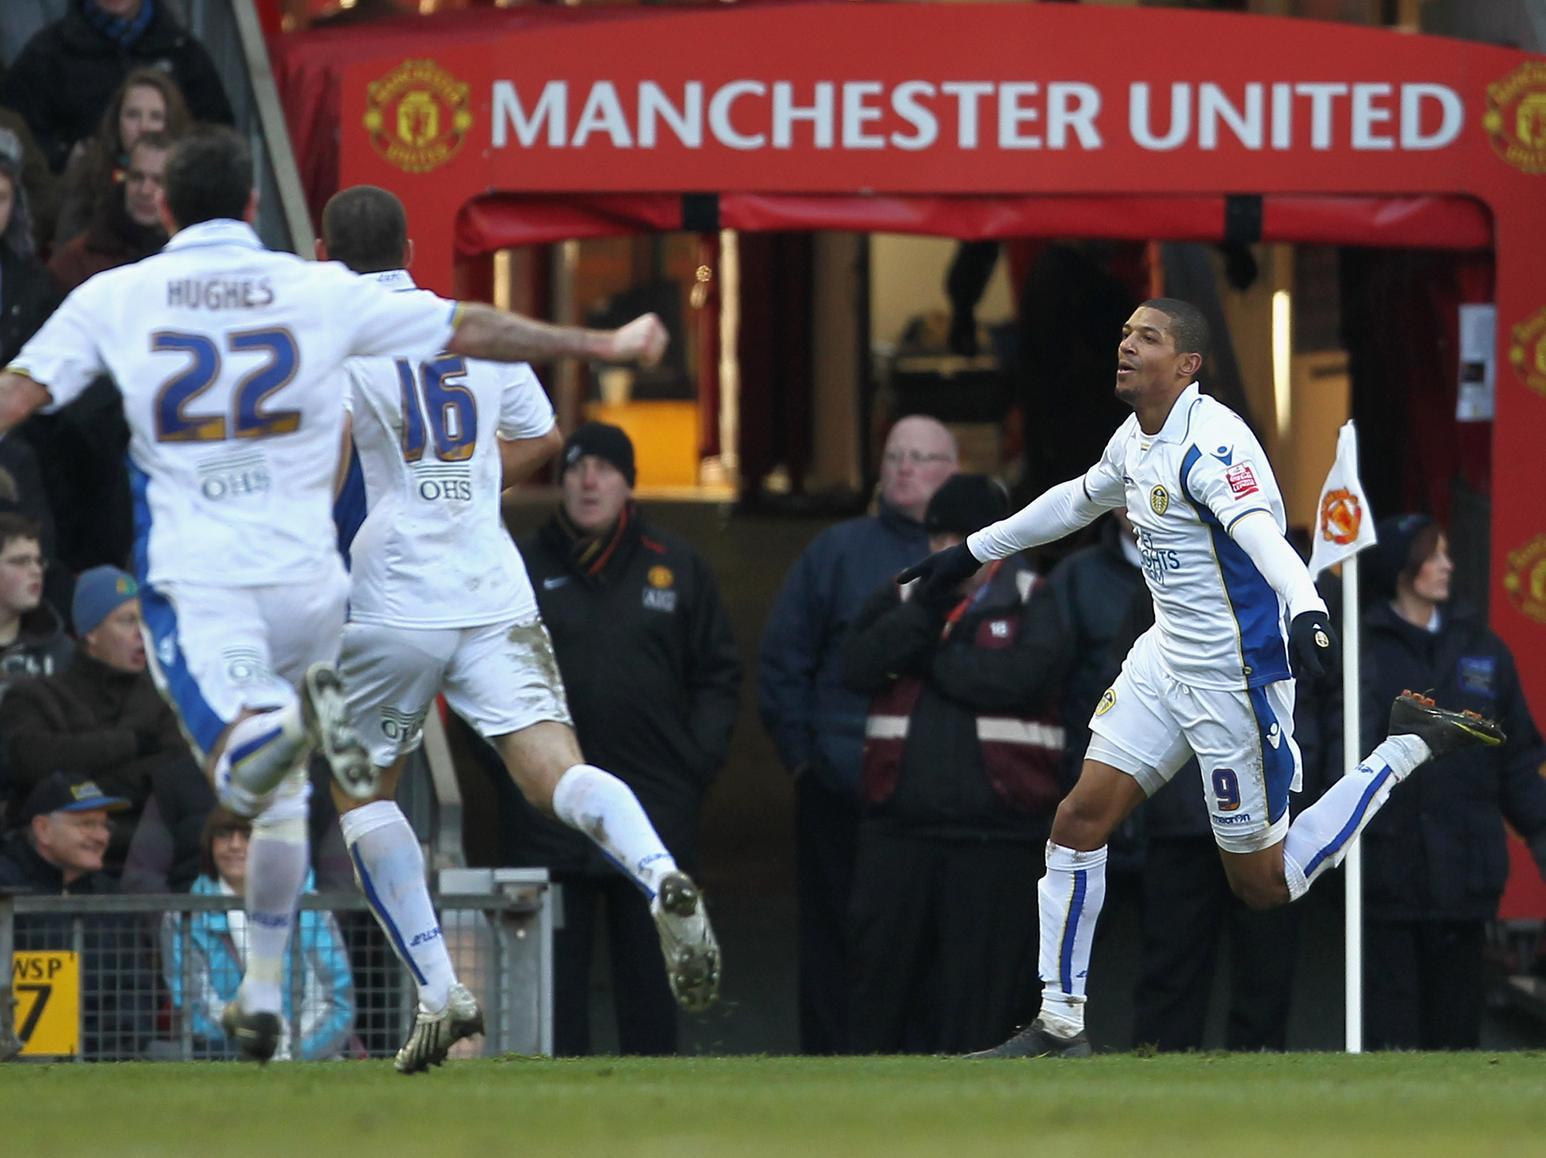 Leeds United's Jermaine Beckford opens the scoring at Old Trafford. (Getty)